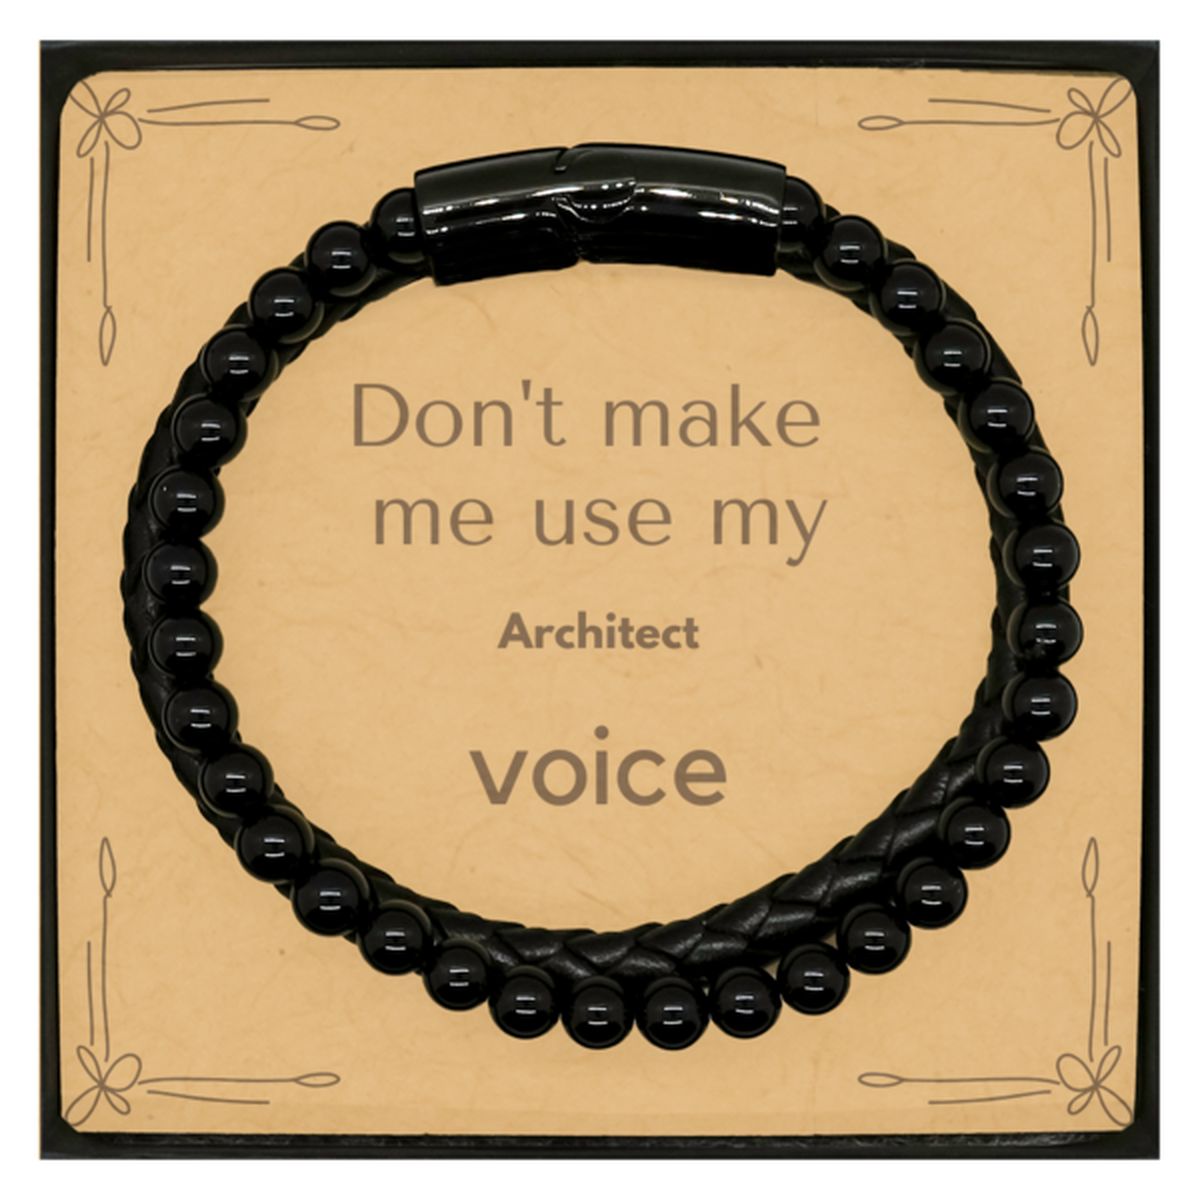 Don't make me use my Architect voice, Sarcasm Architect Card Gifts, Christmas Architect Stone Leather Bracelets Birthday Unique Gifts For Architect Coworkers, Men, Women, Colleague, Friends